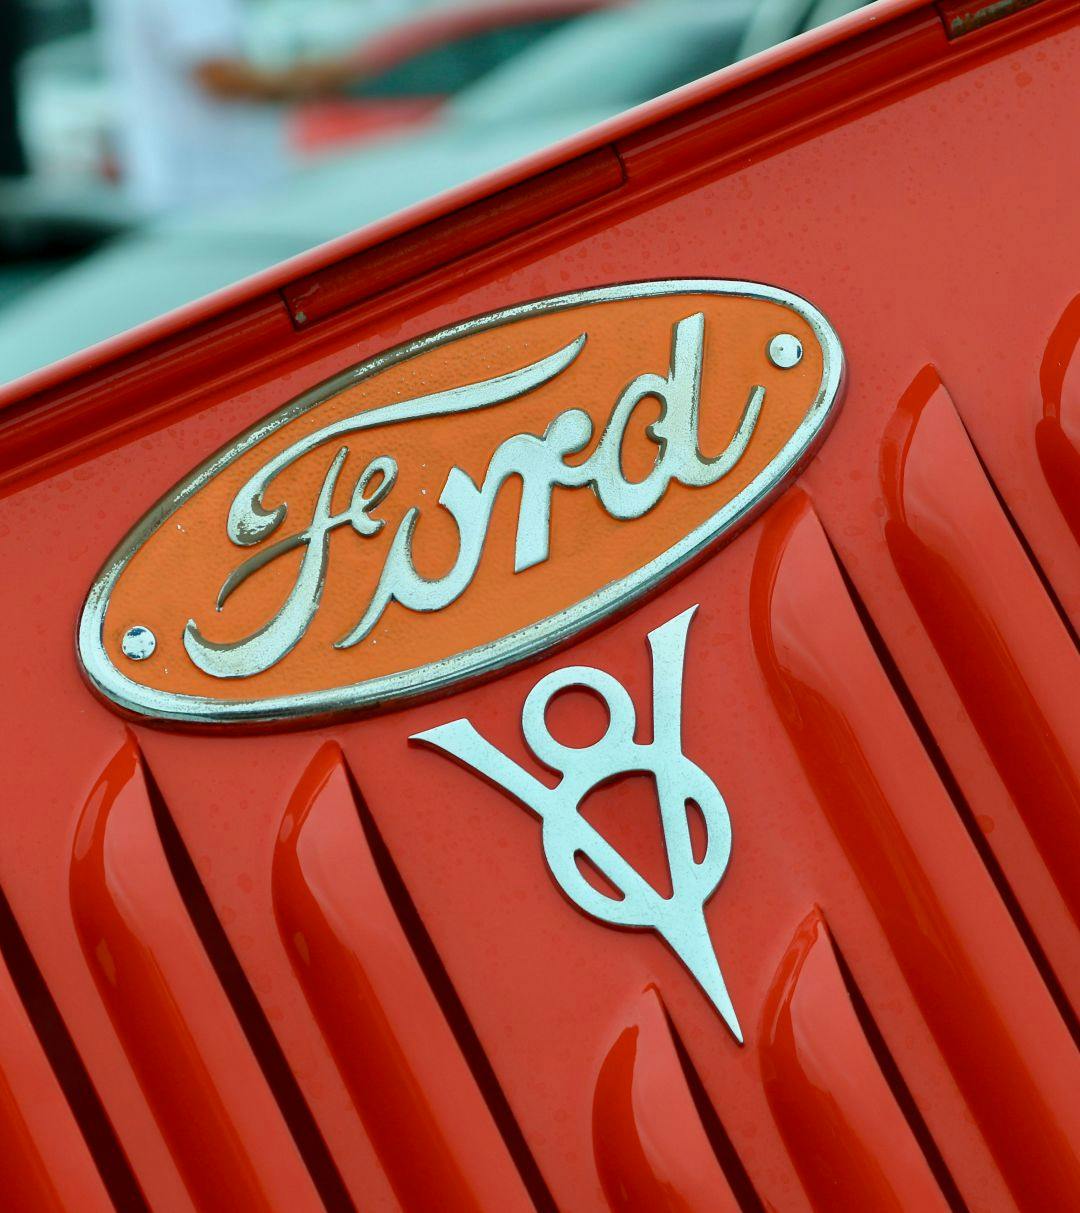 The Ford V8 logo on the back of a pickup truck